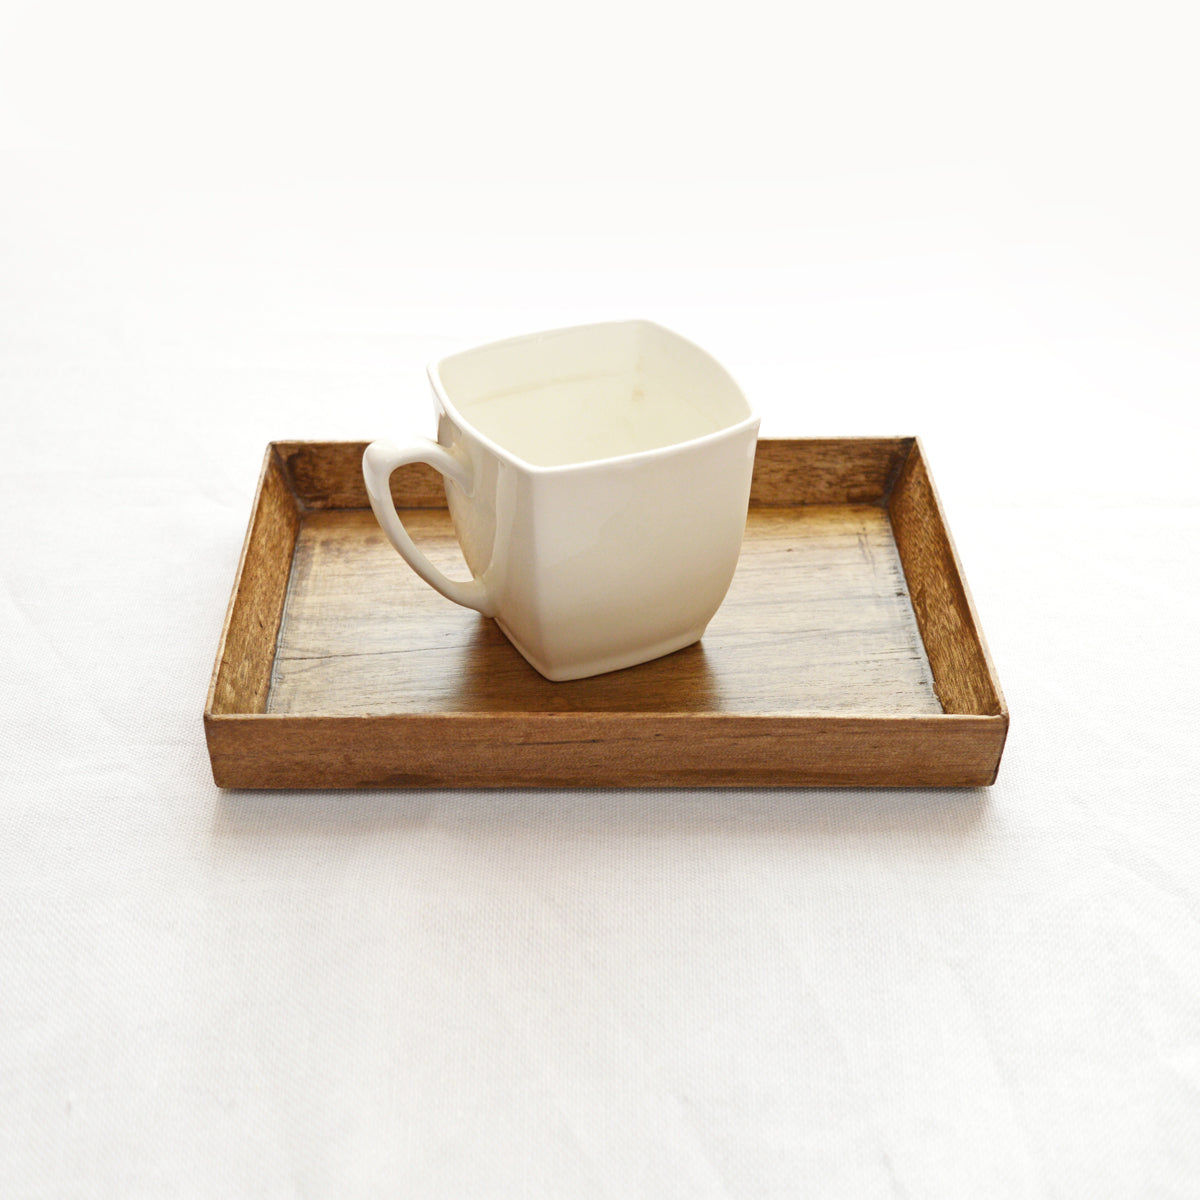 Small rustic mango wood tray - size 5X7 inches